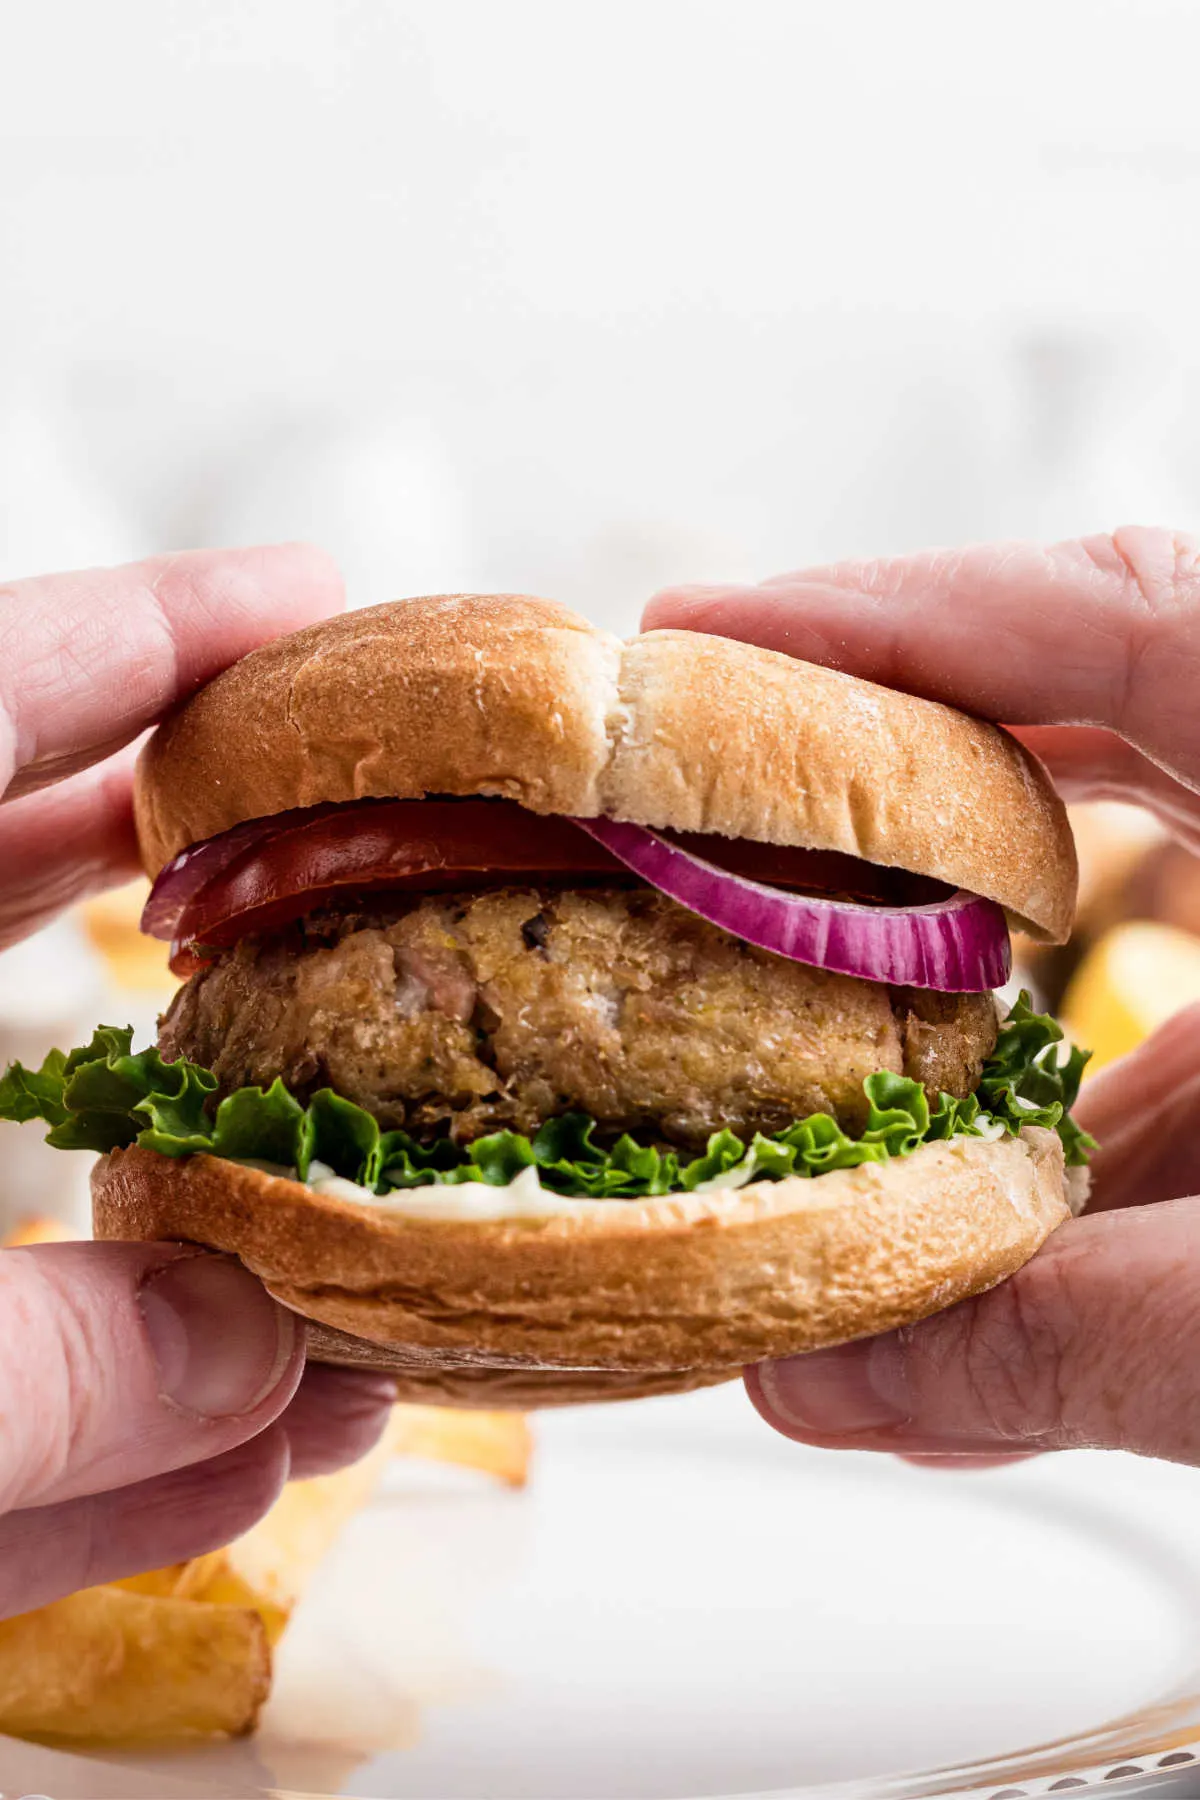 Hands holding tuna burger on bun with lettuce and red onion, ready to eat. 